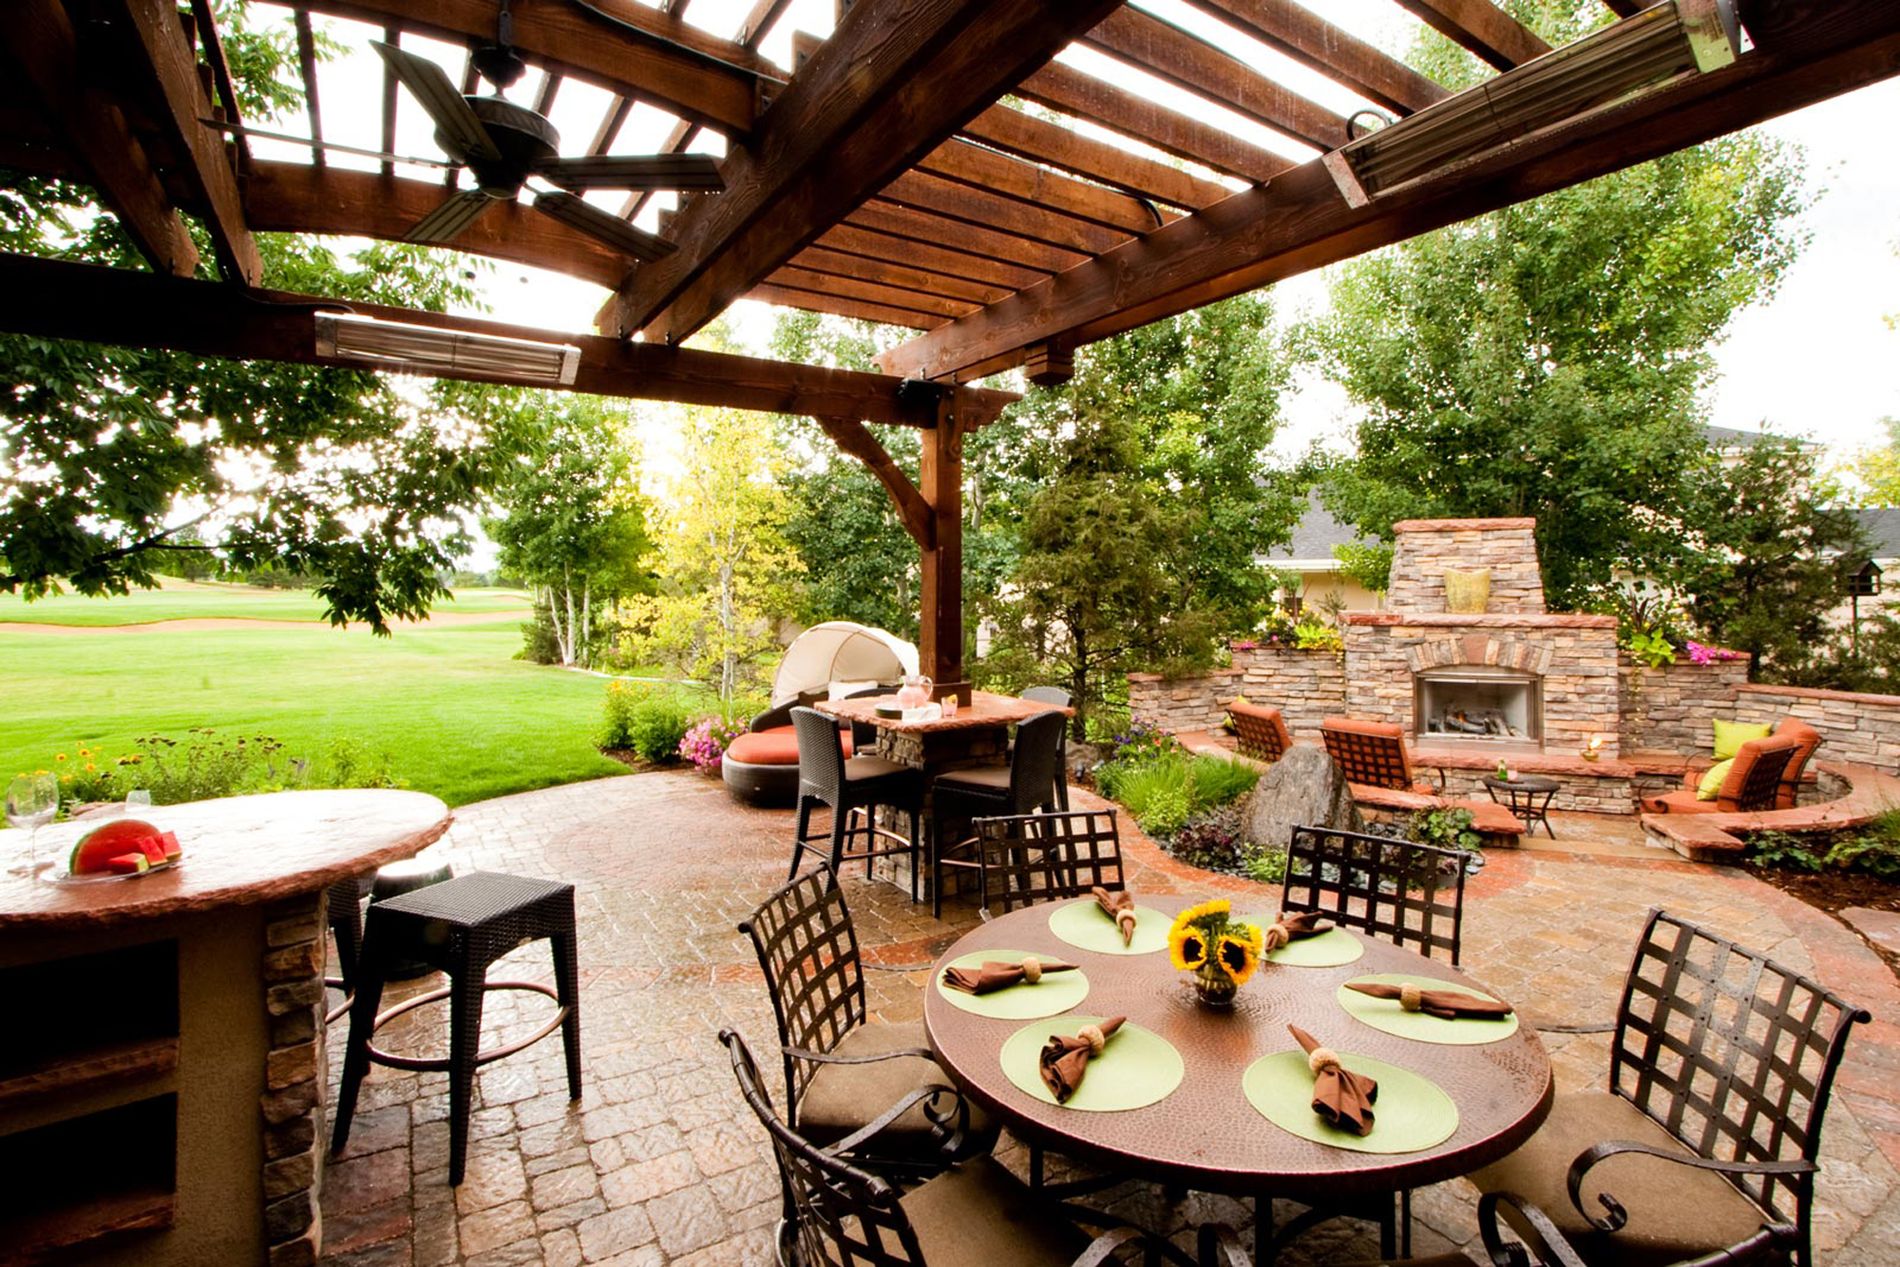 Outdoor Fireplace With Paver Patio and Shade Structure